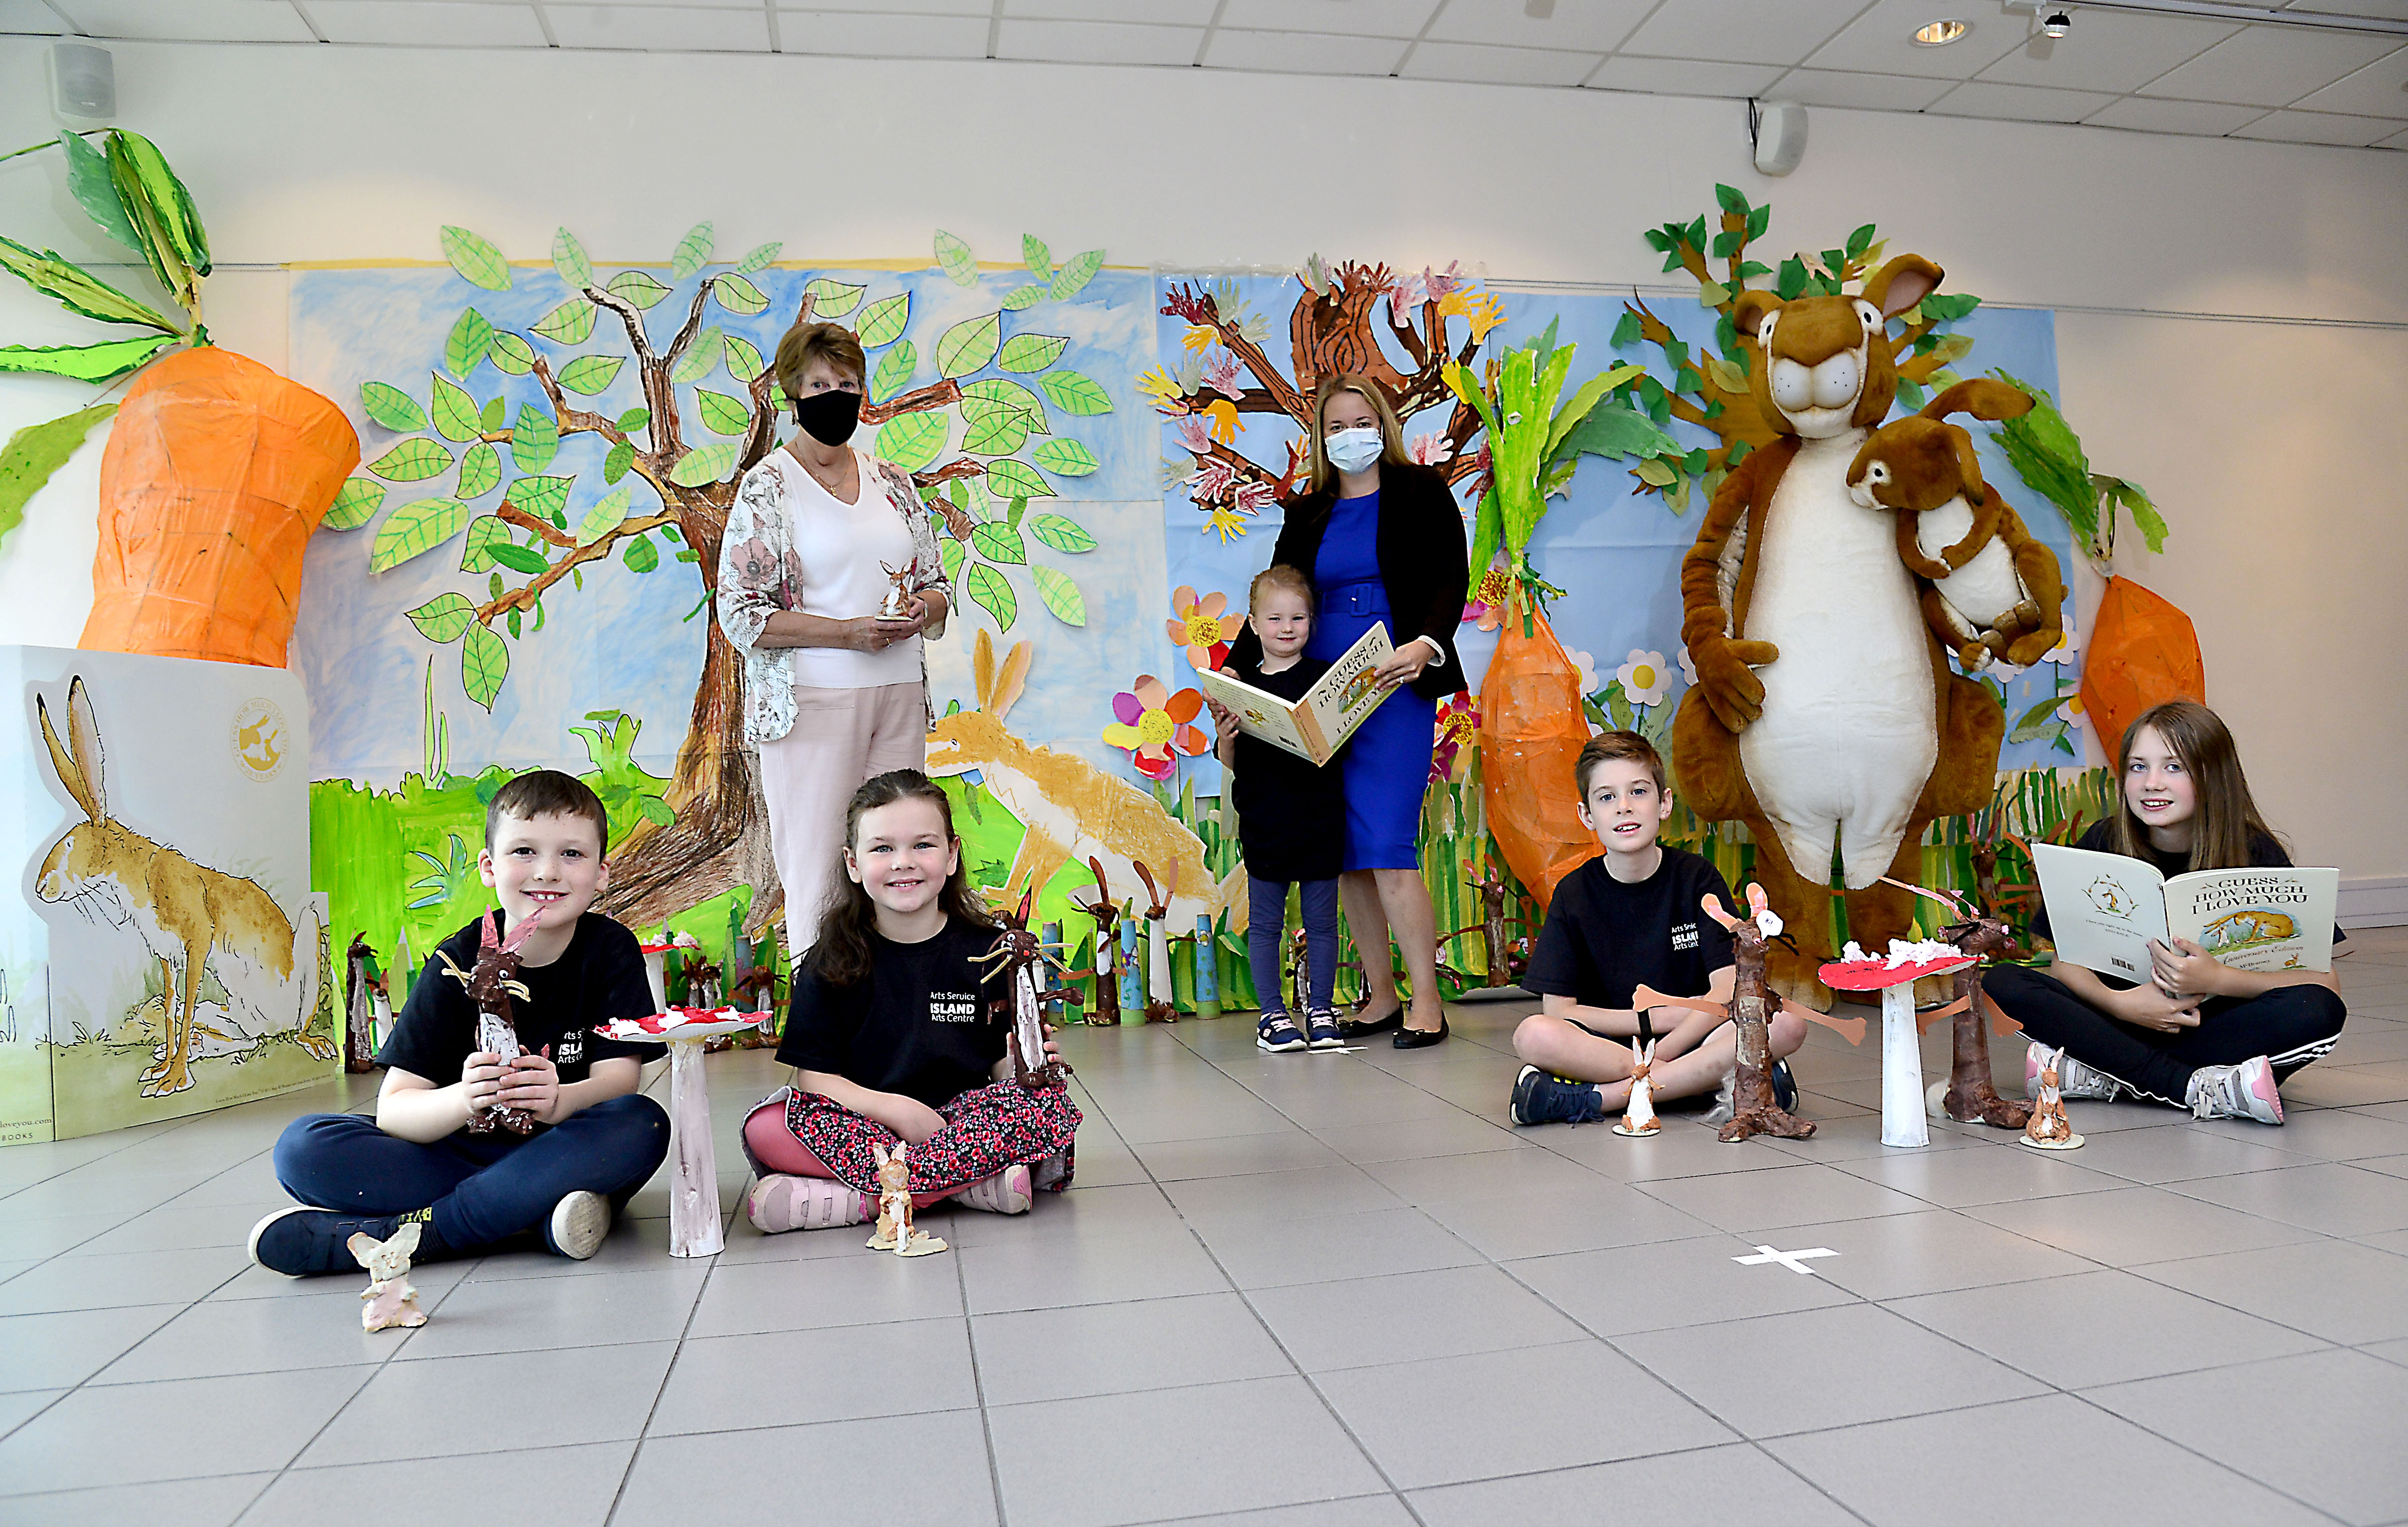 ISLAND Arts Centre celebrates its hugely successful Sam McBratney ‘Guess How Much I Love You’ Children’s Arts Festival!